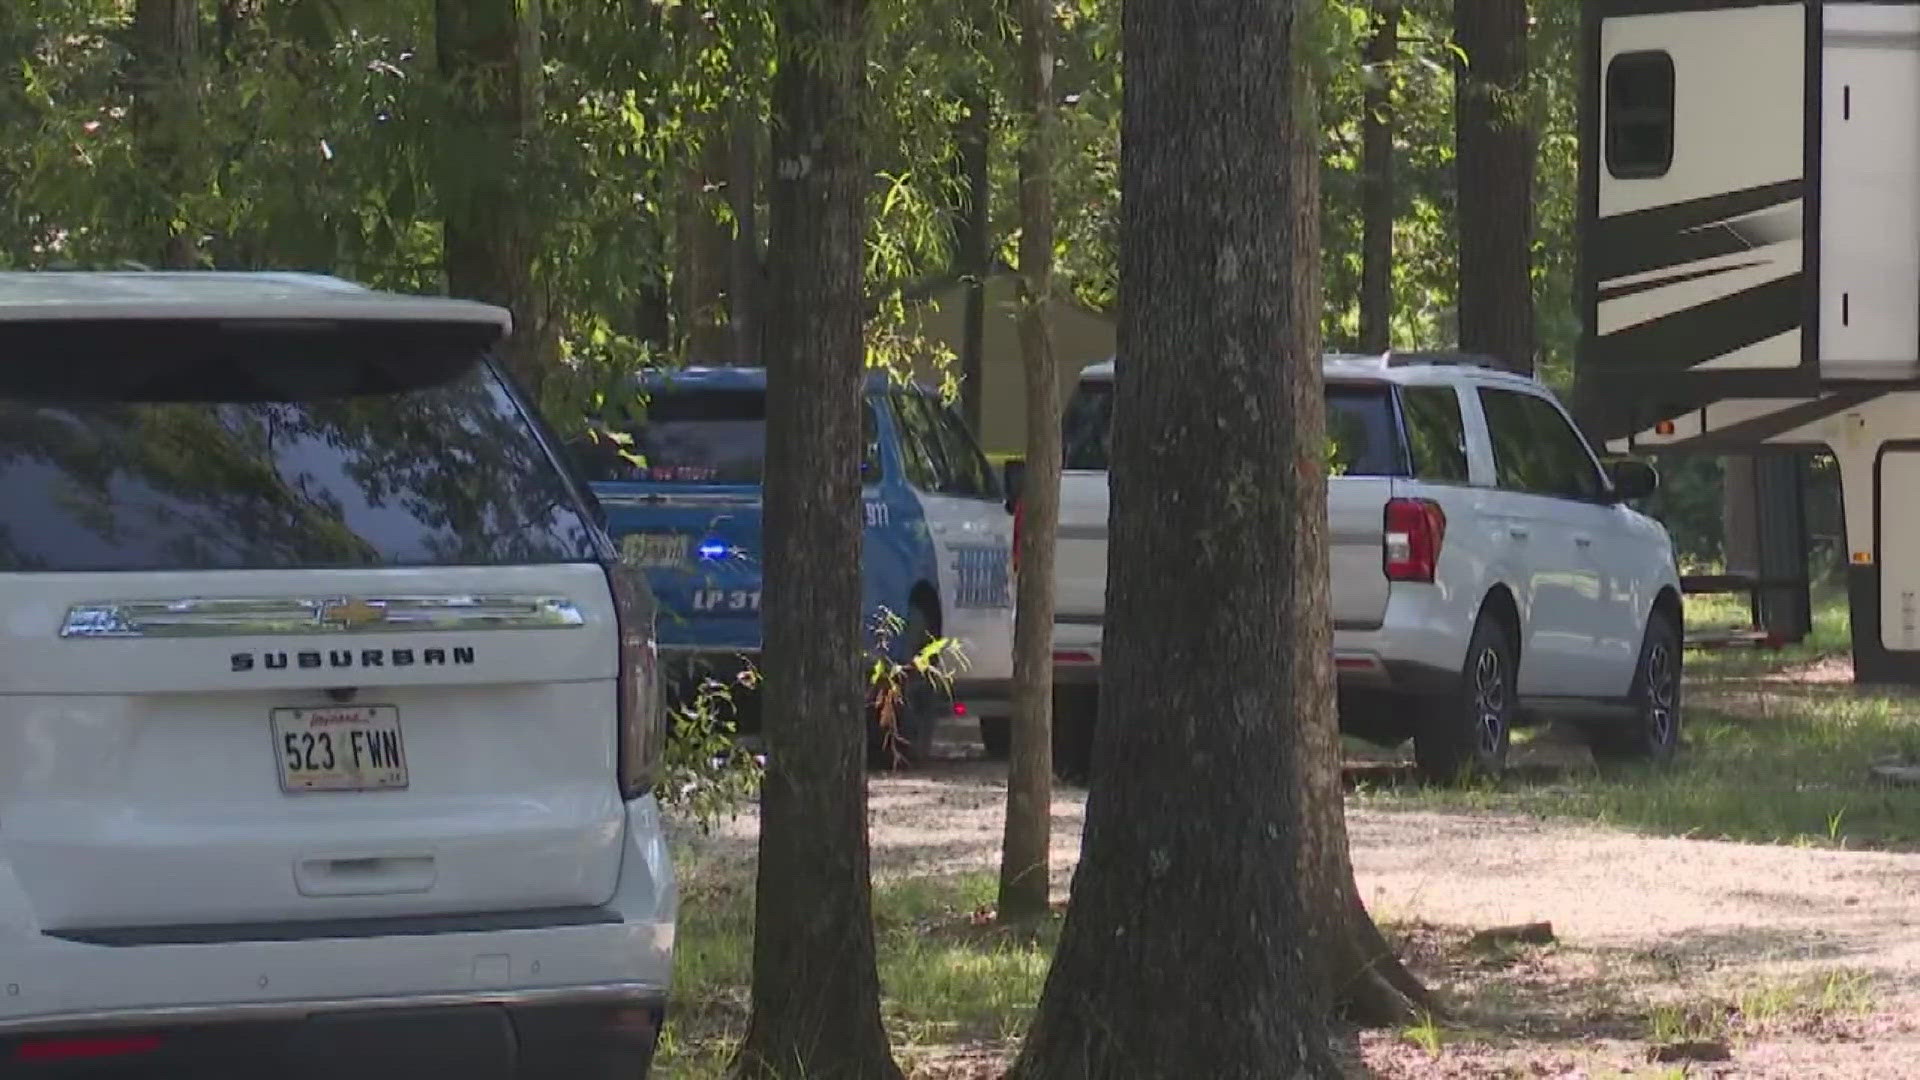 Deputies said the murders likely happened late Friday or early Saturday.